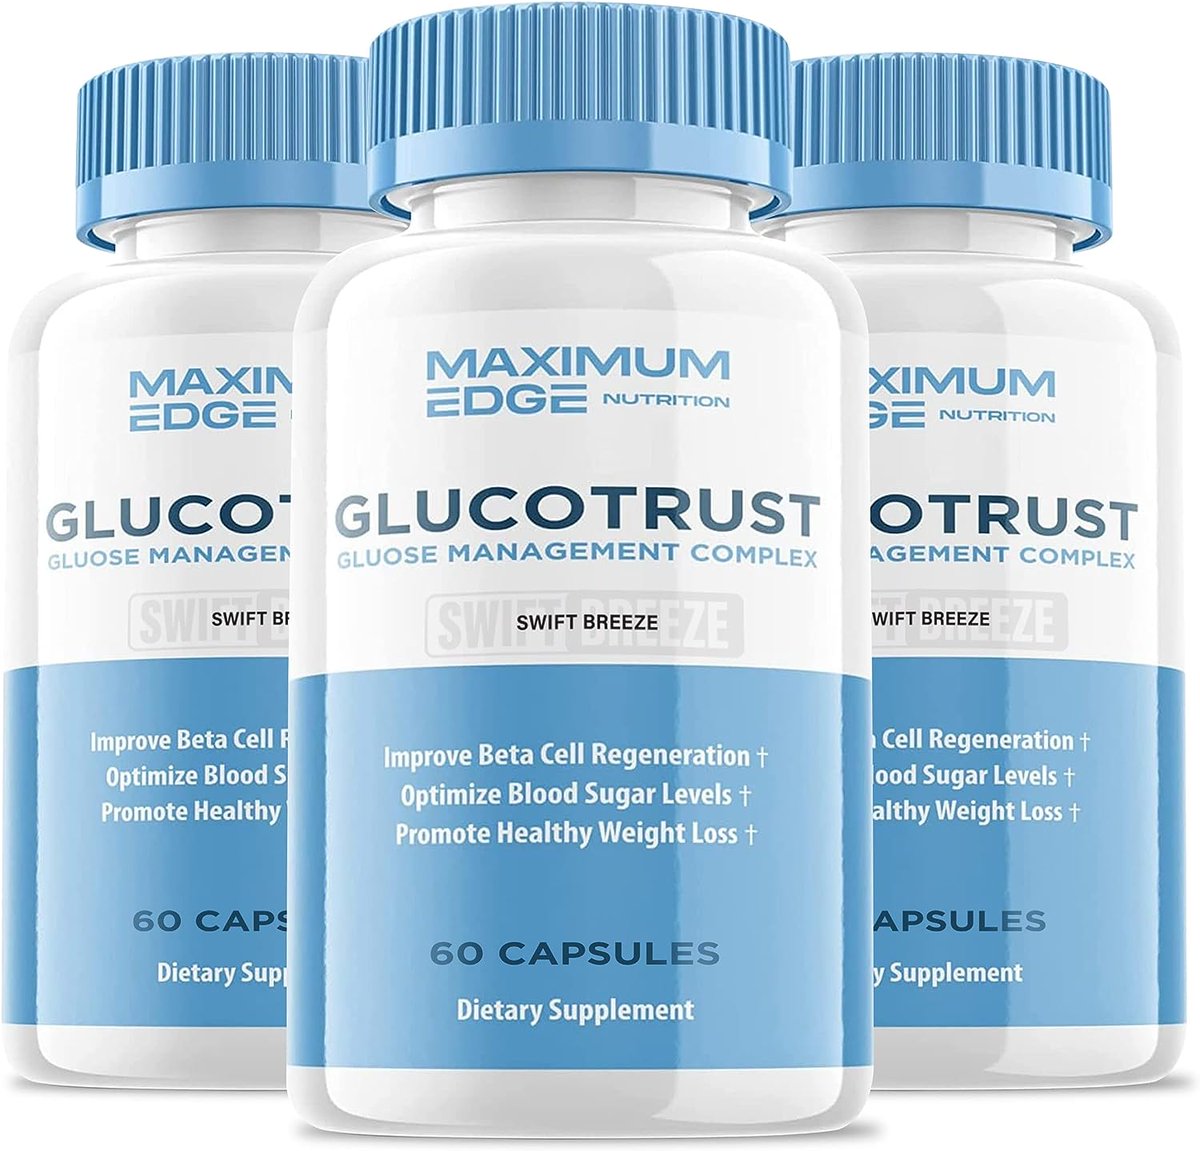 🩸Take Charge of Your Health with Blood Sugar Level Showdown! 🩸 📢 Attention everyone! Let's talk about something important – our blood sugar levels! Maintaining healthy blood sugar levels is crucial for overall well-being. 🛒Shop now:getglucotrustproducts.systeme.io/glucotrust #bloodsugarsupport